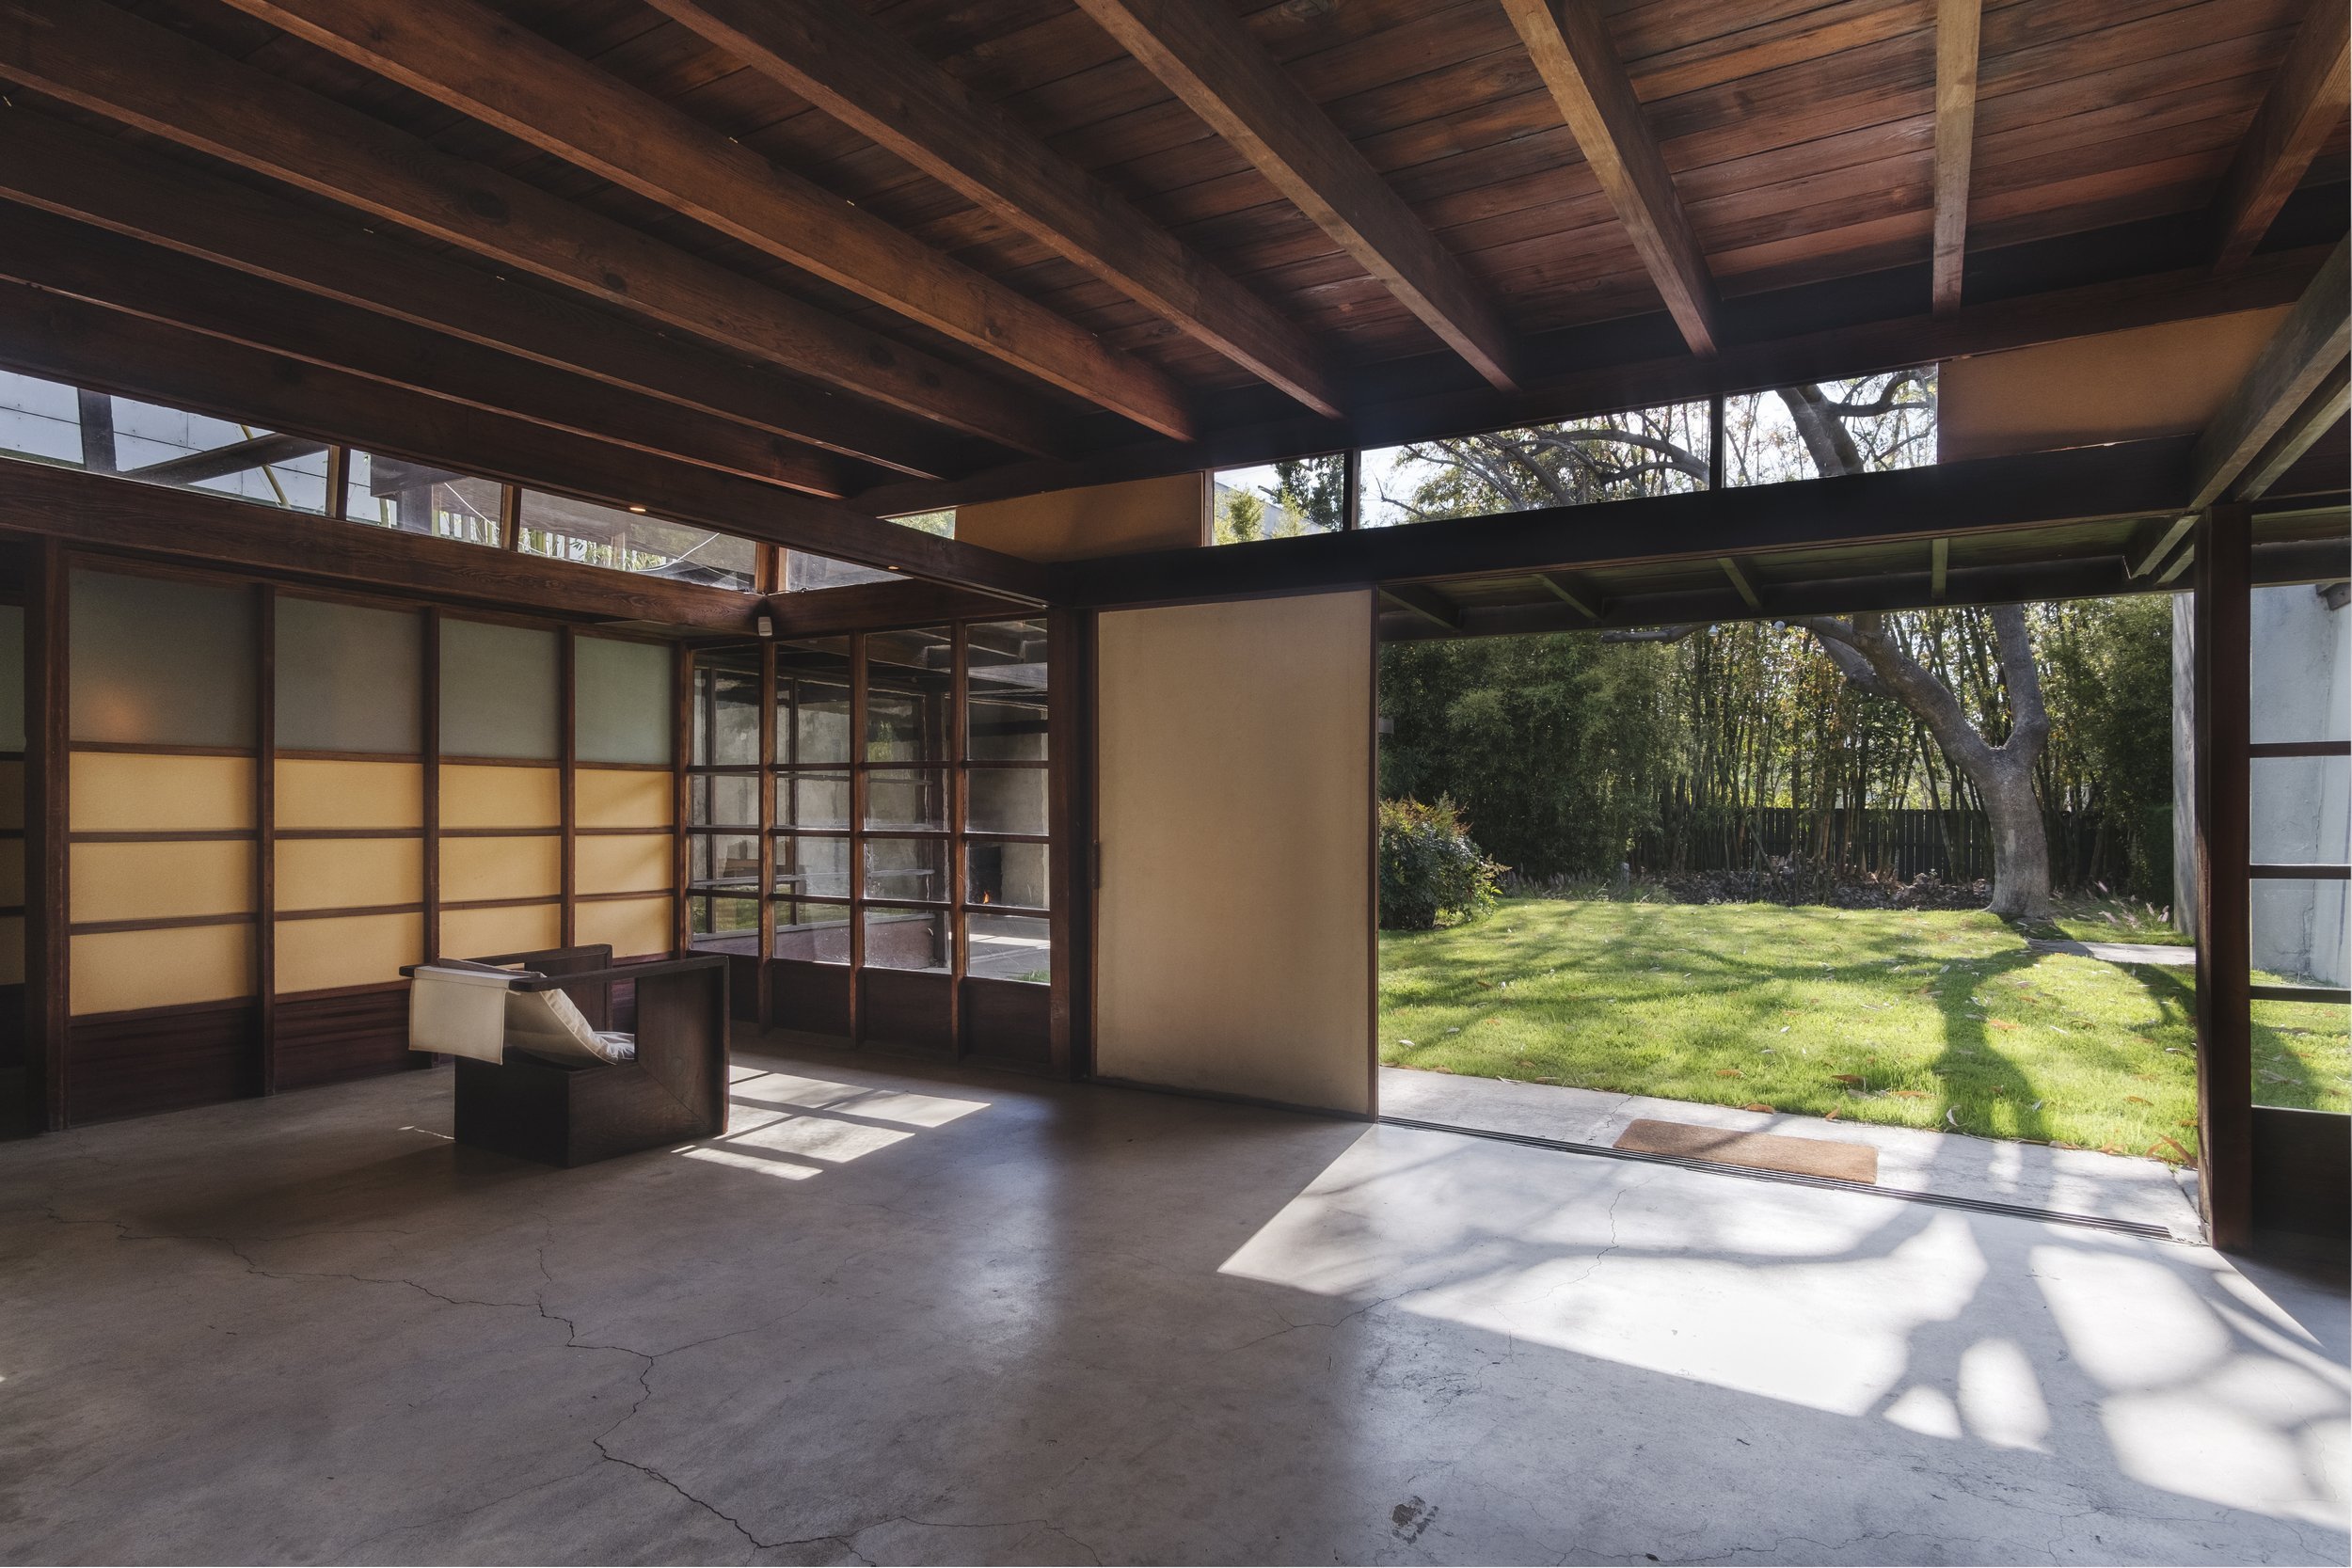 The Schindler House Interior Polished Concrete Floors - Rudolph Schindler